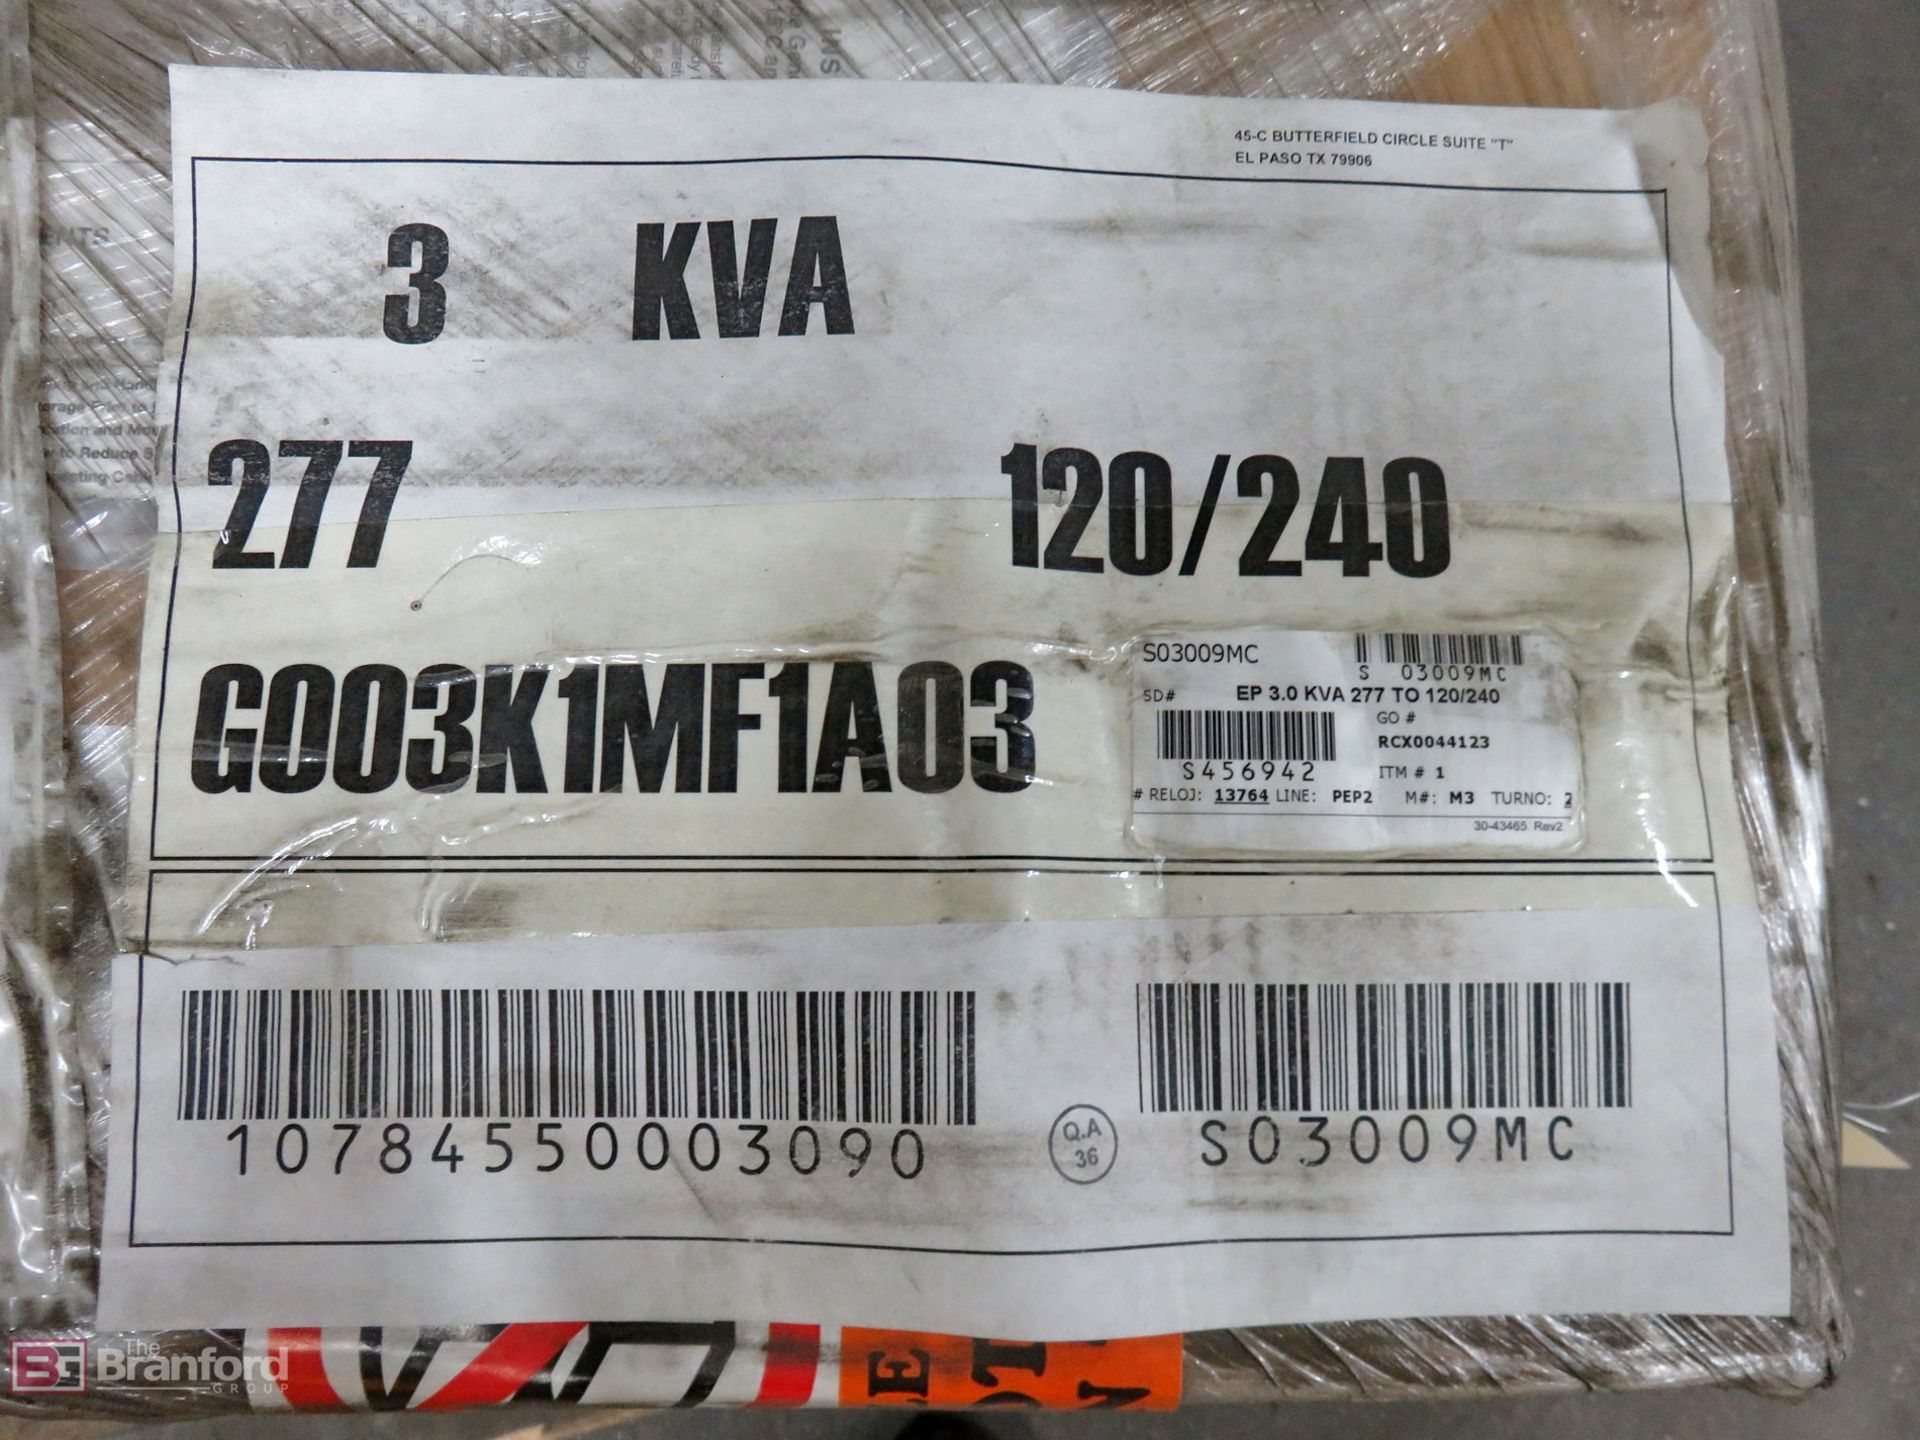 (4) Micron G003K1MF1A03 dry type 3-kVA transformers - Image 6 of 6